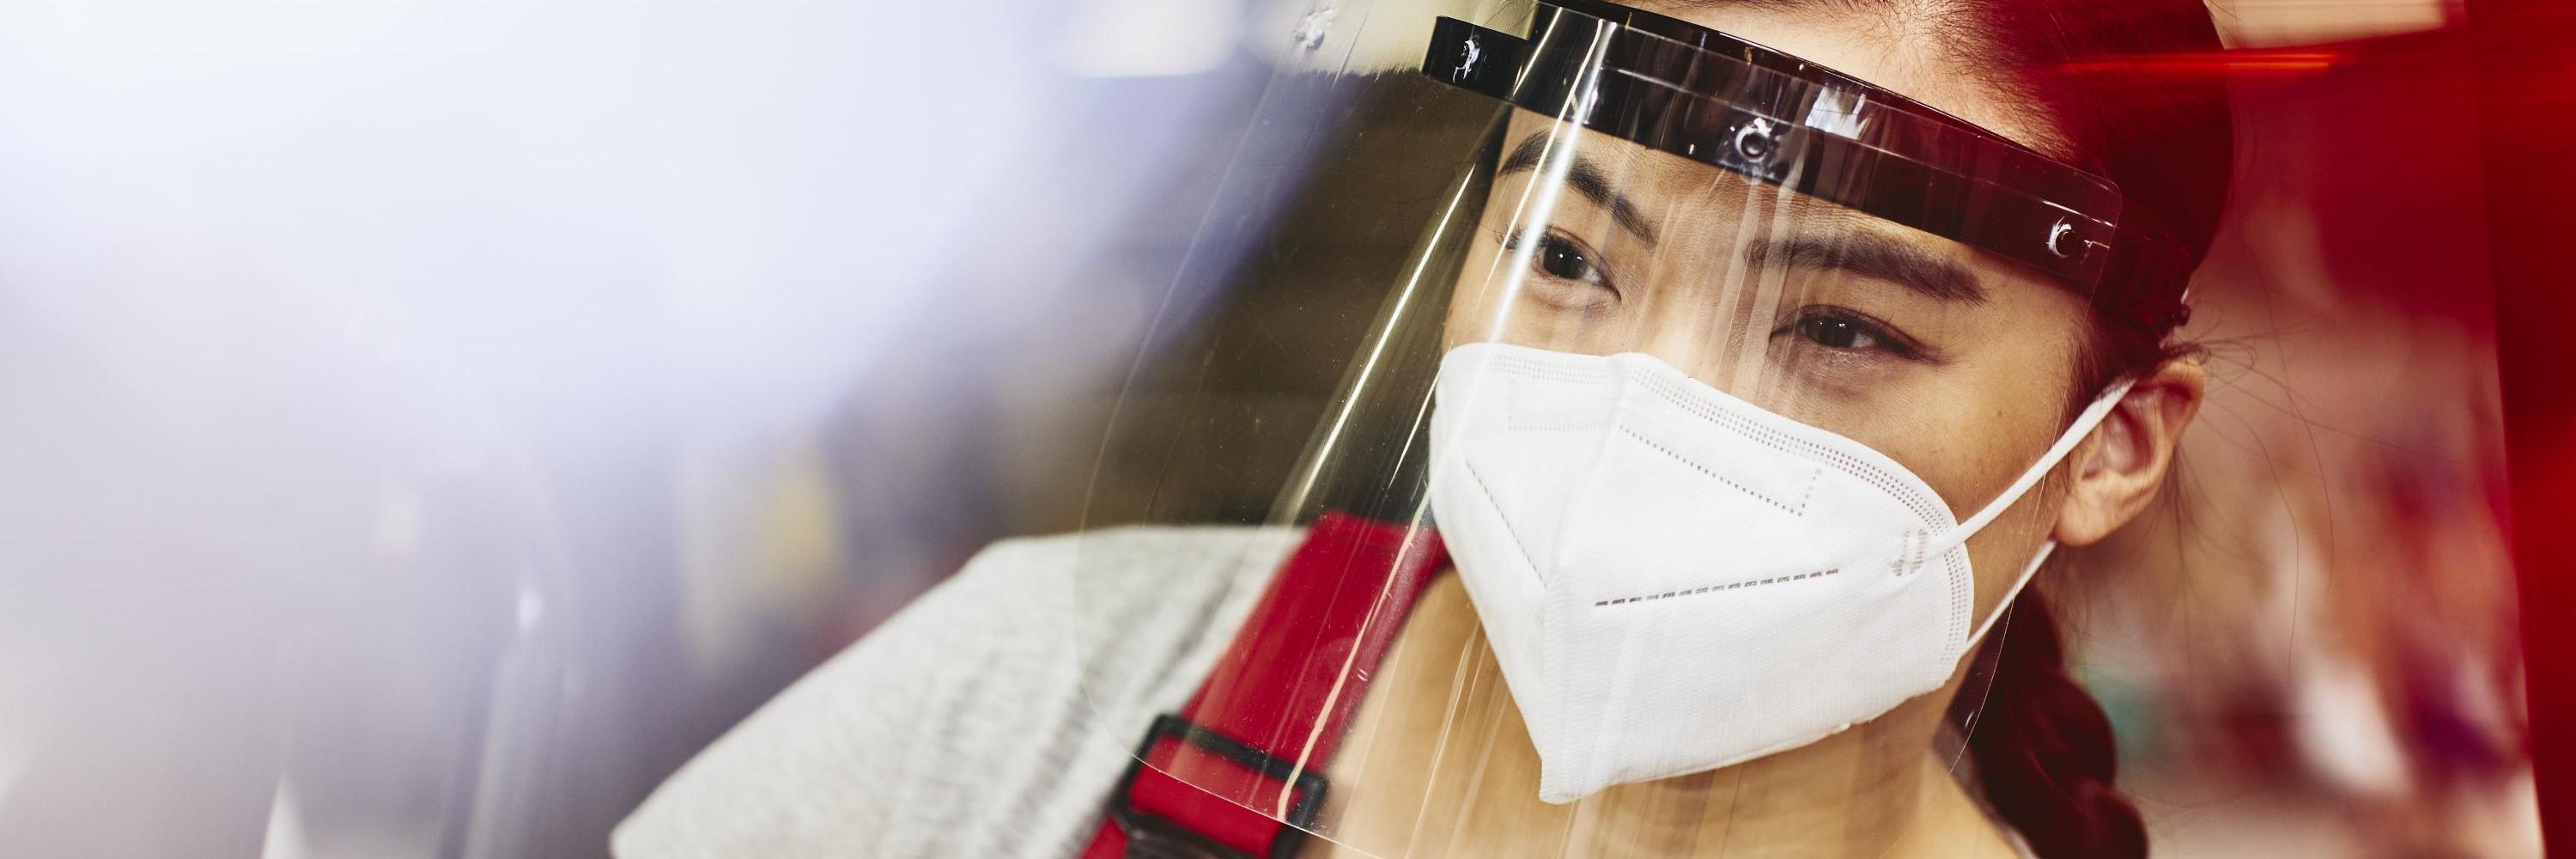 woman wearing mask and face shield at work.